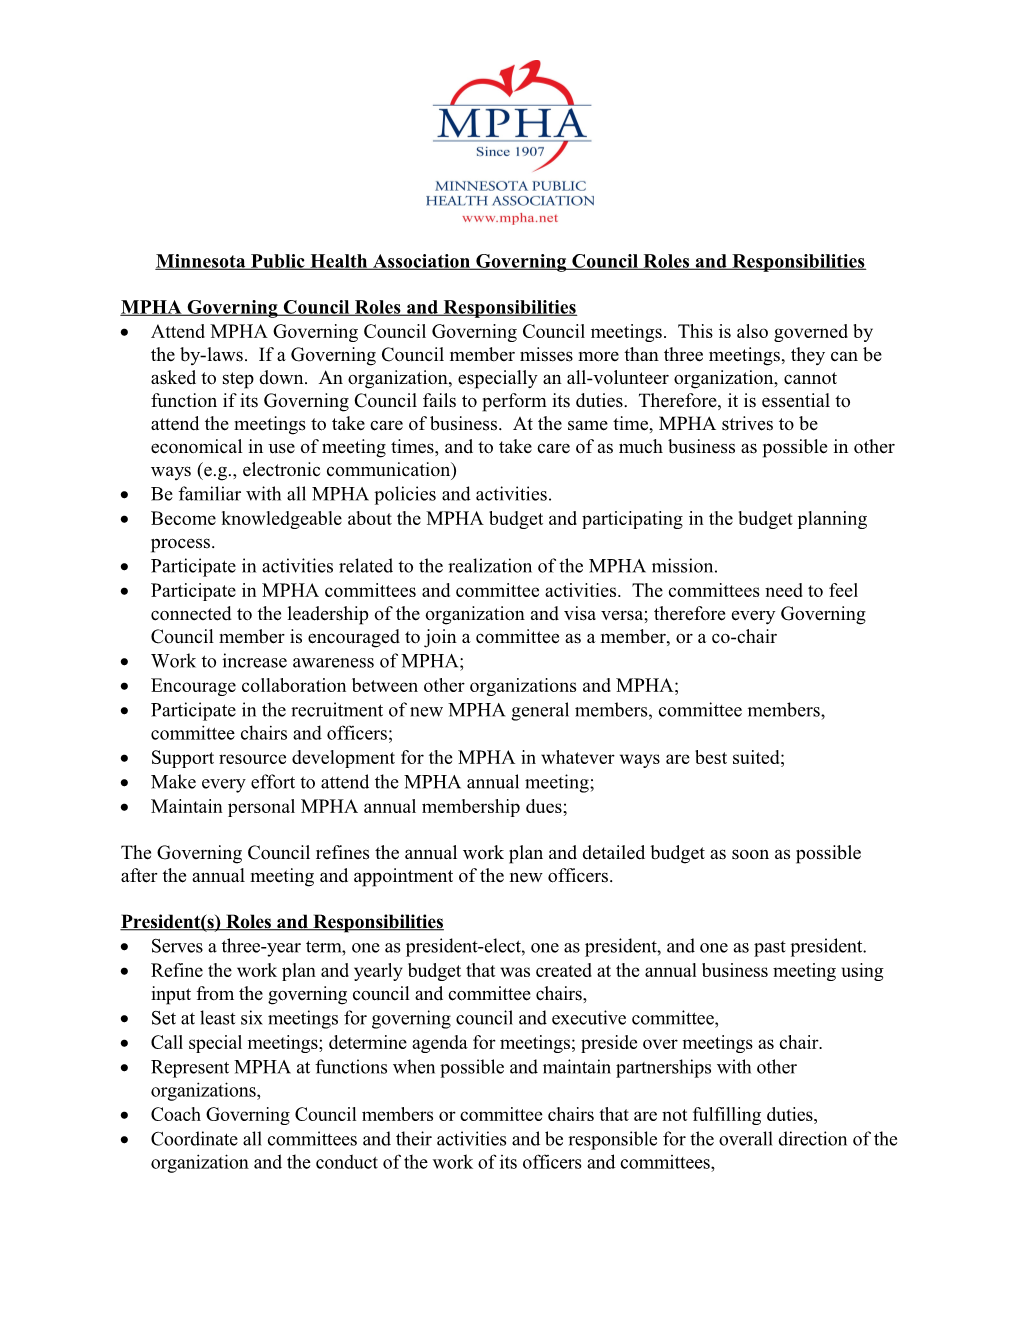 Minnesota Public Health Association Governing Council Roles and Responsibilities